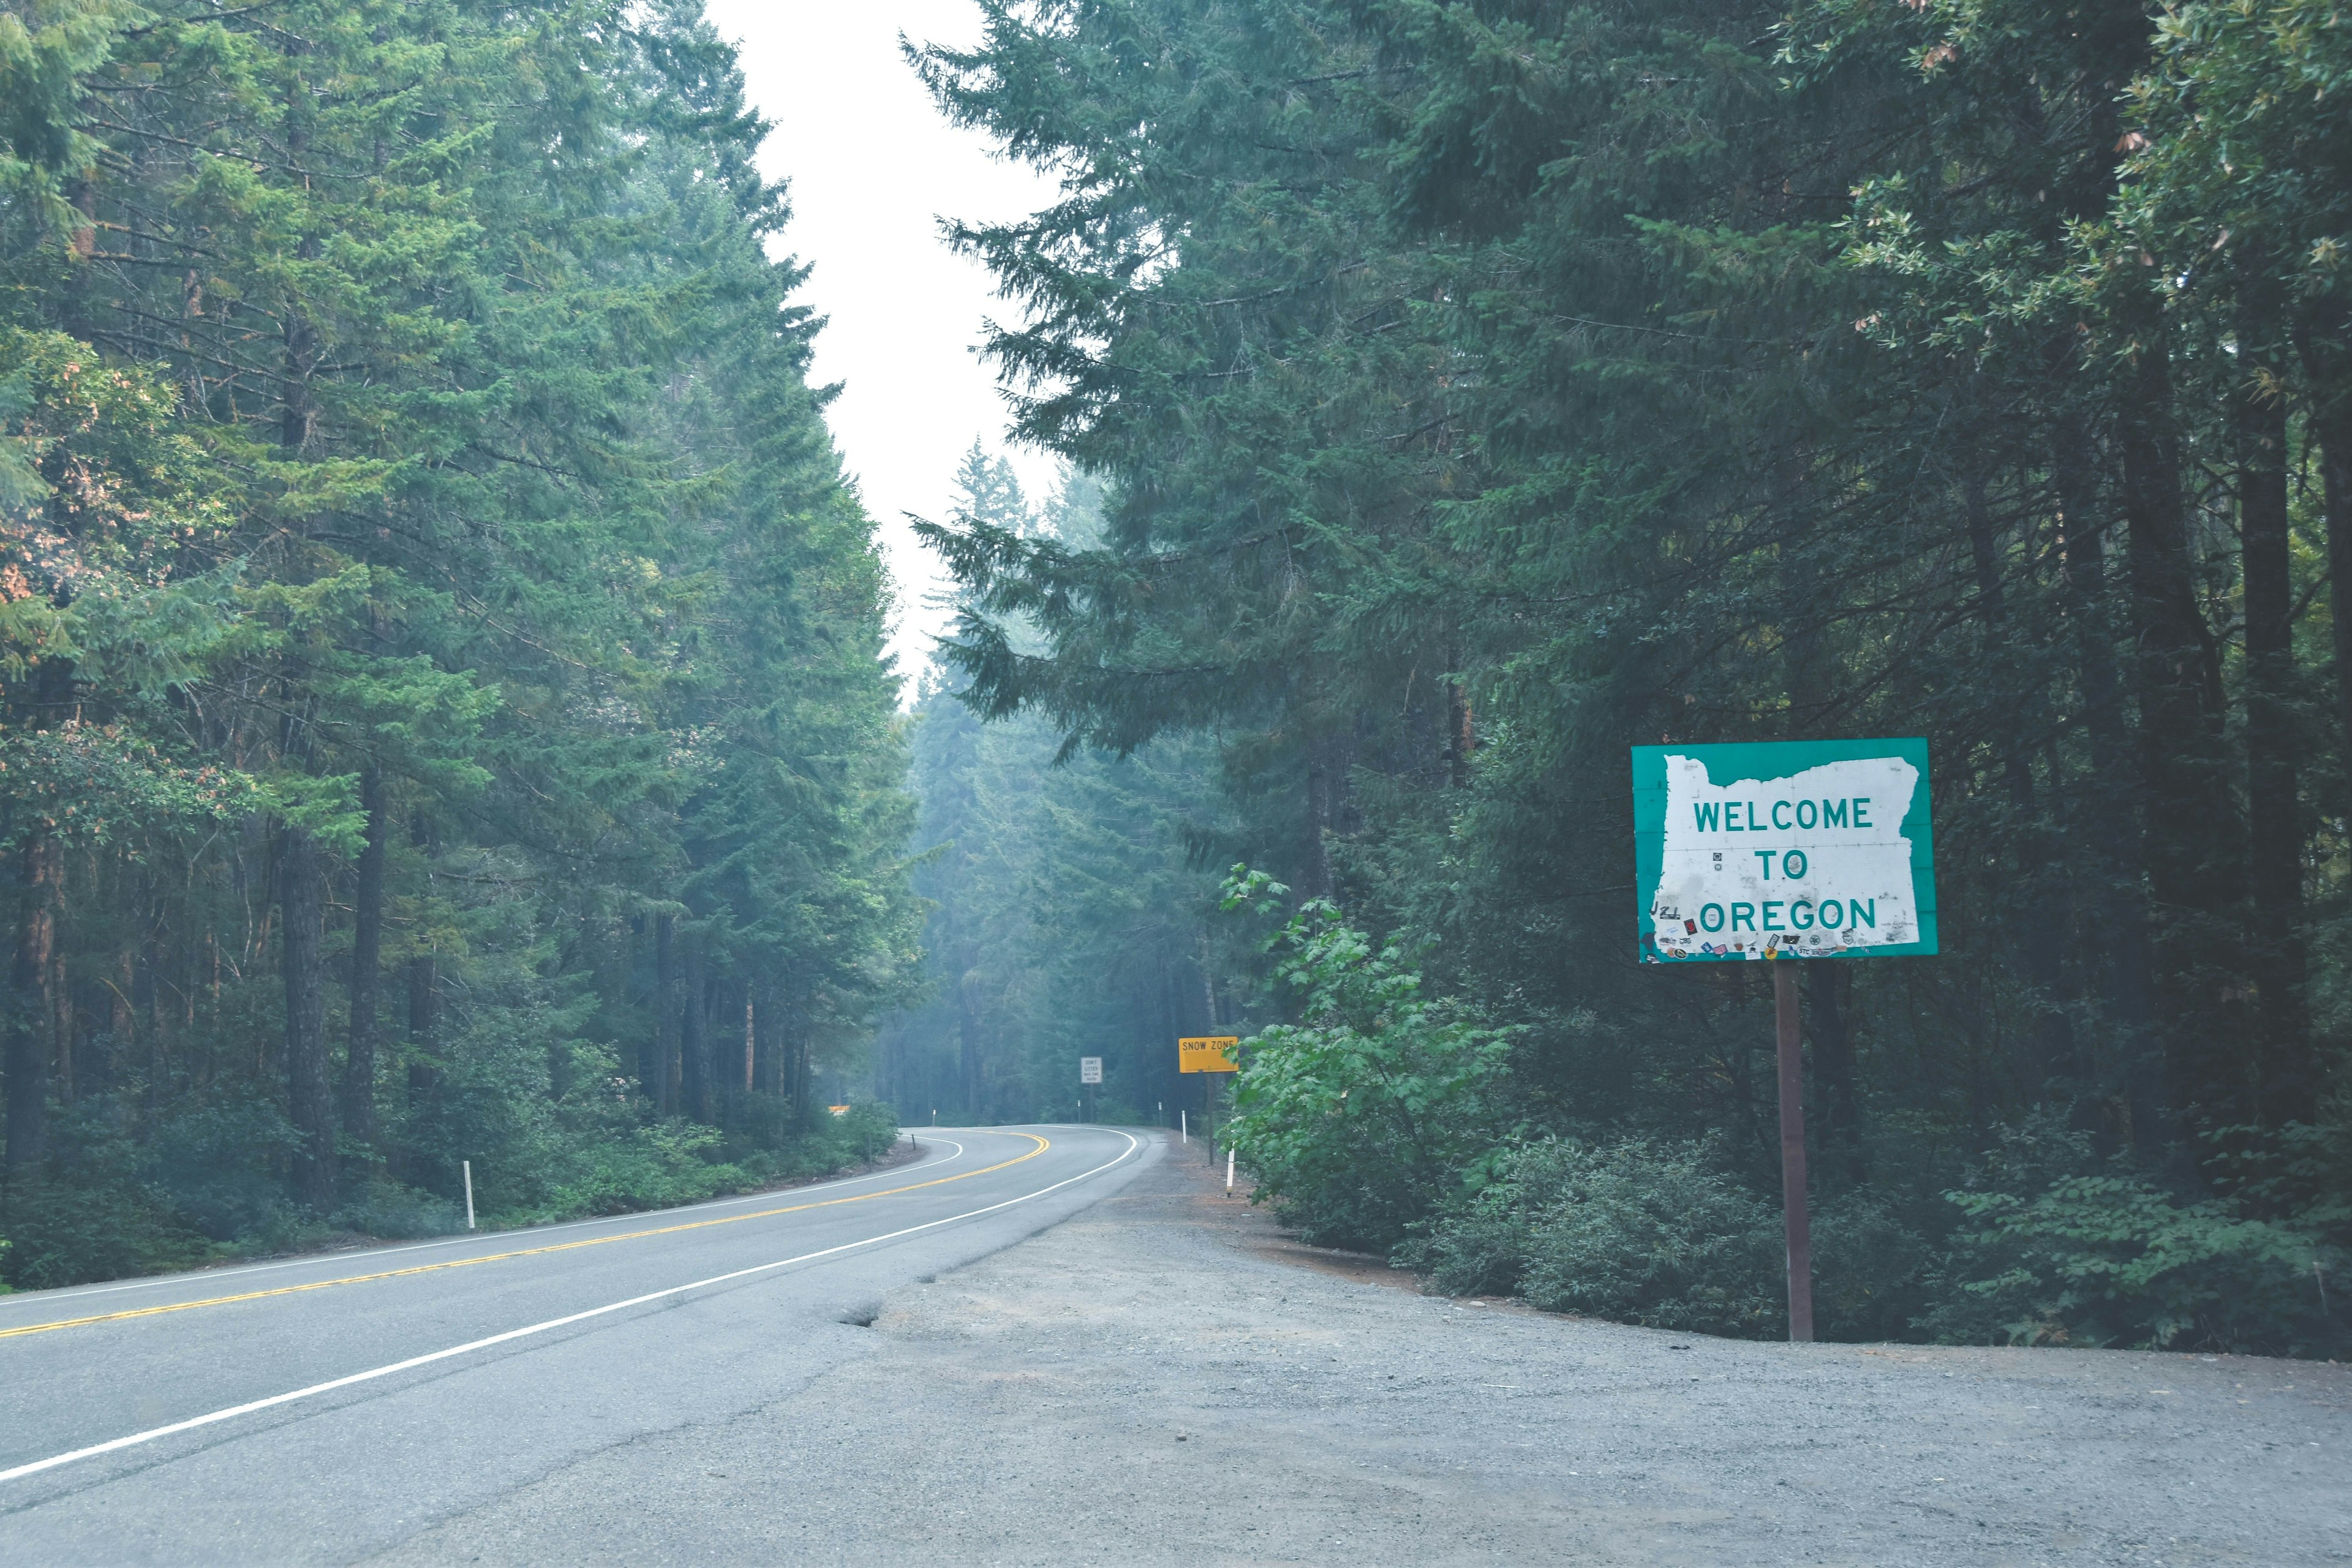 a photo of a tree-lined road and a sign that says "welcome to oregon"